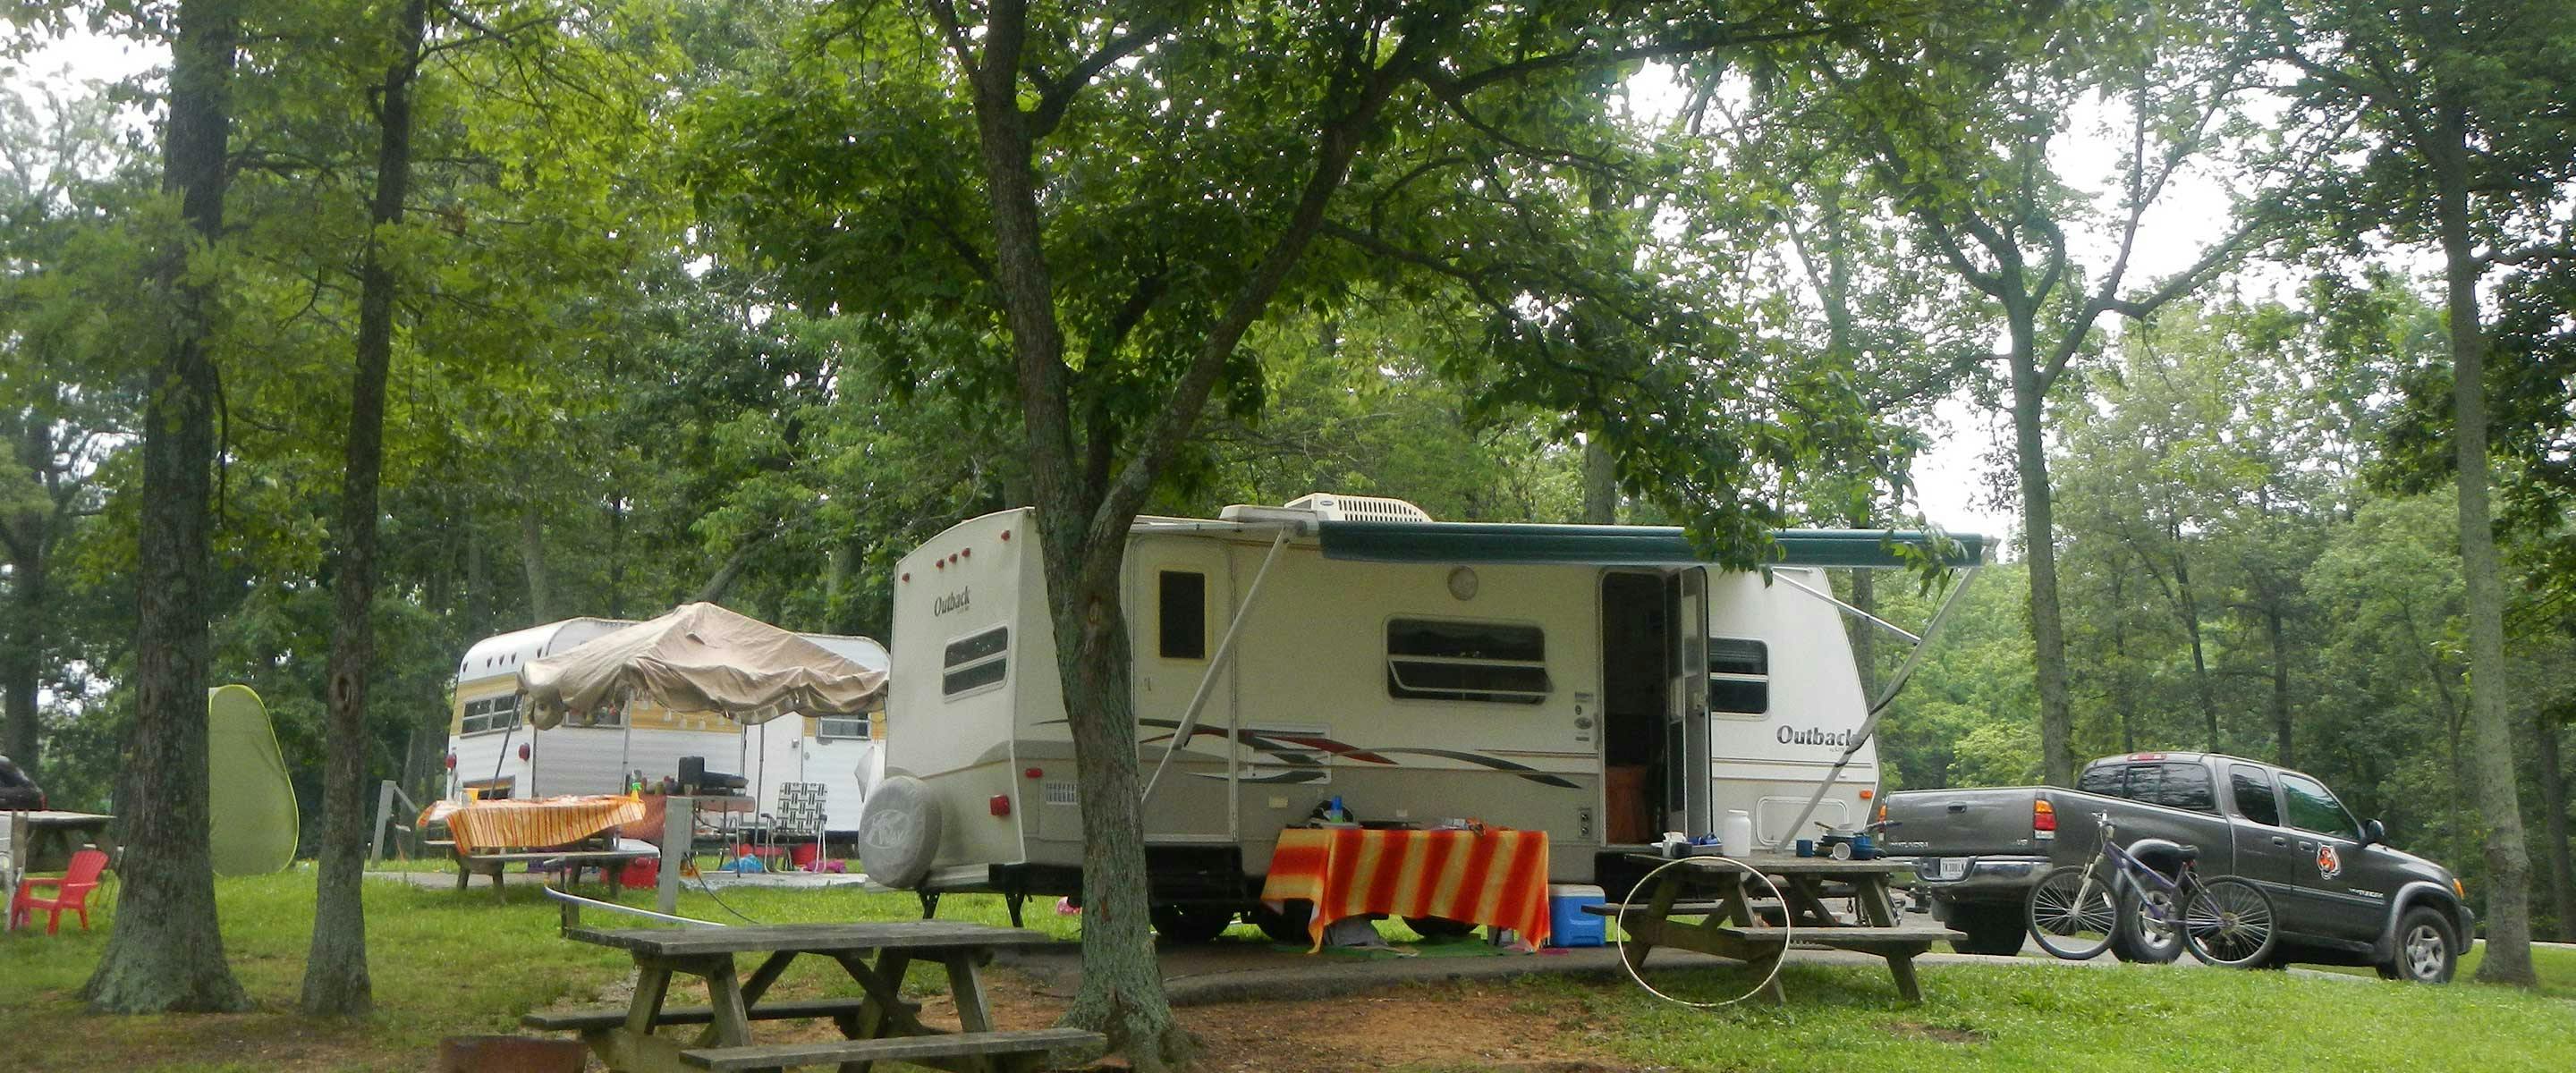 rv camper with tree backdrop on modern campsite at buffalo trace